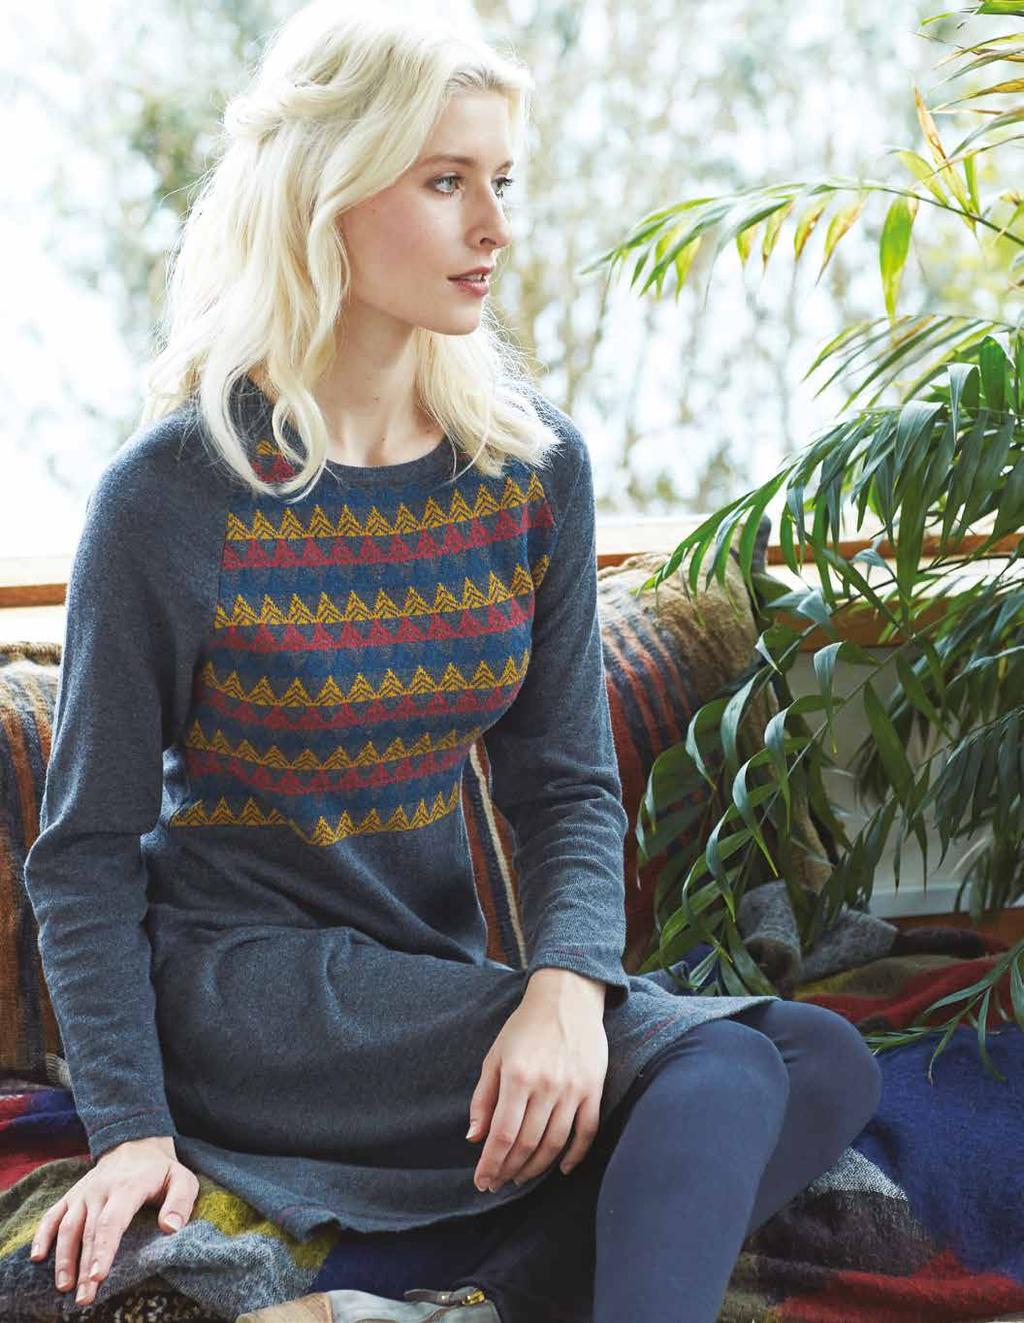 All of our knitwear is made from 100% natural fibres, a